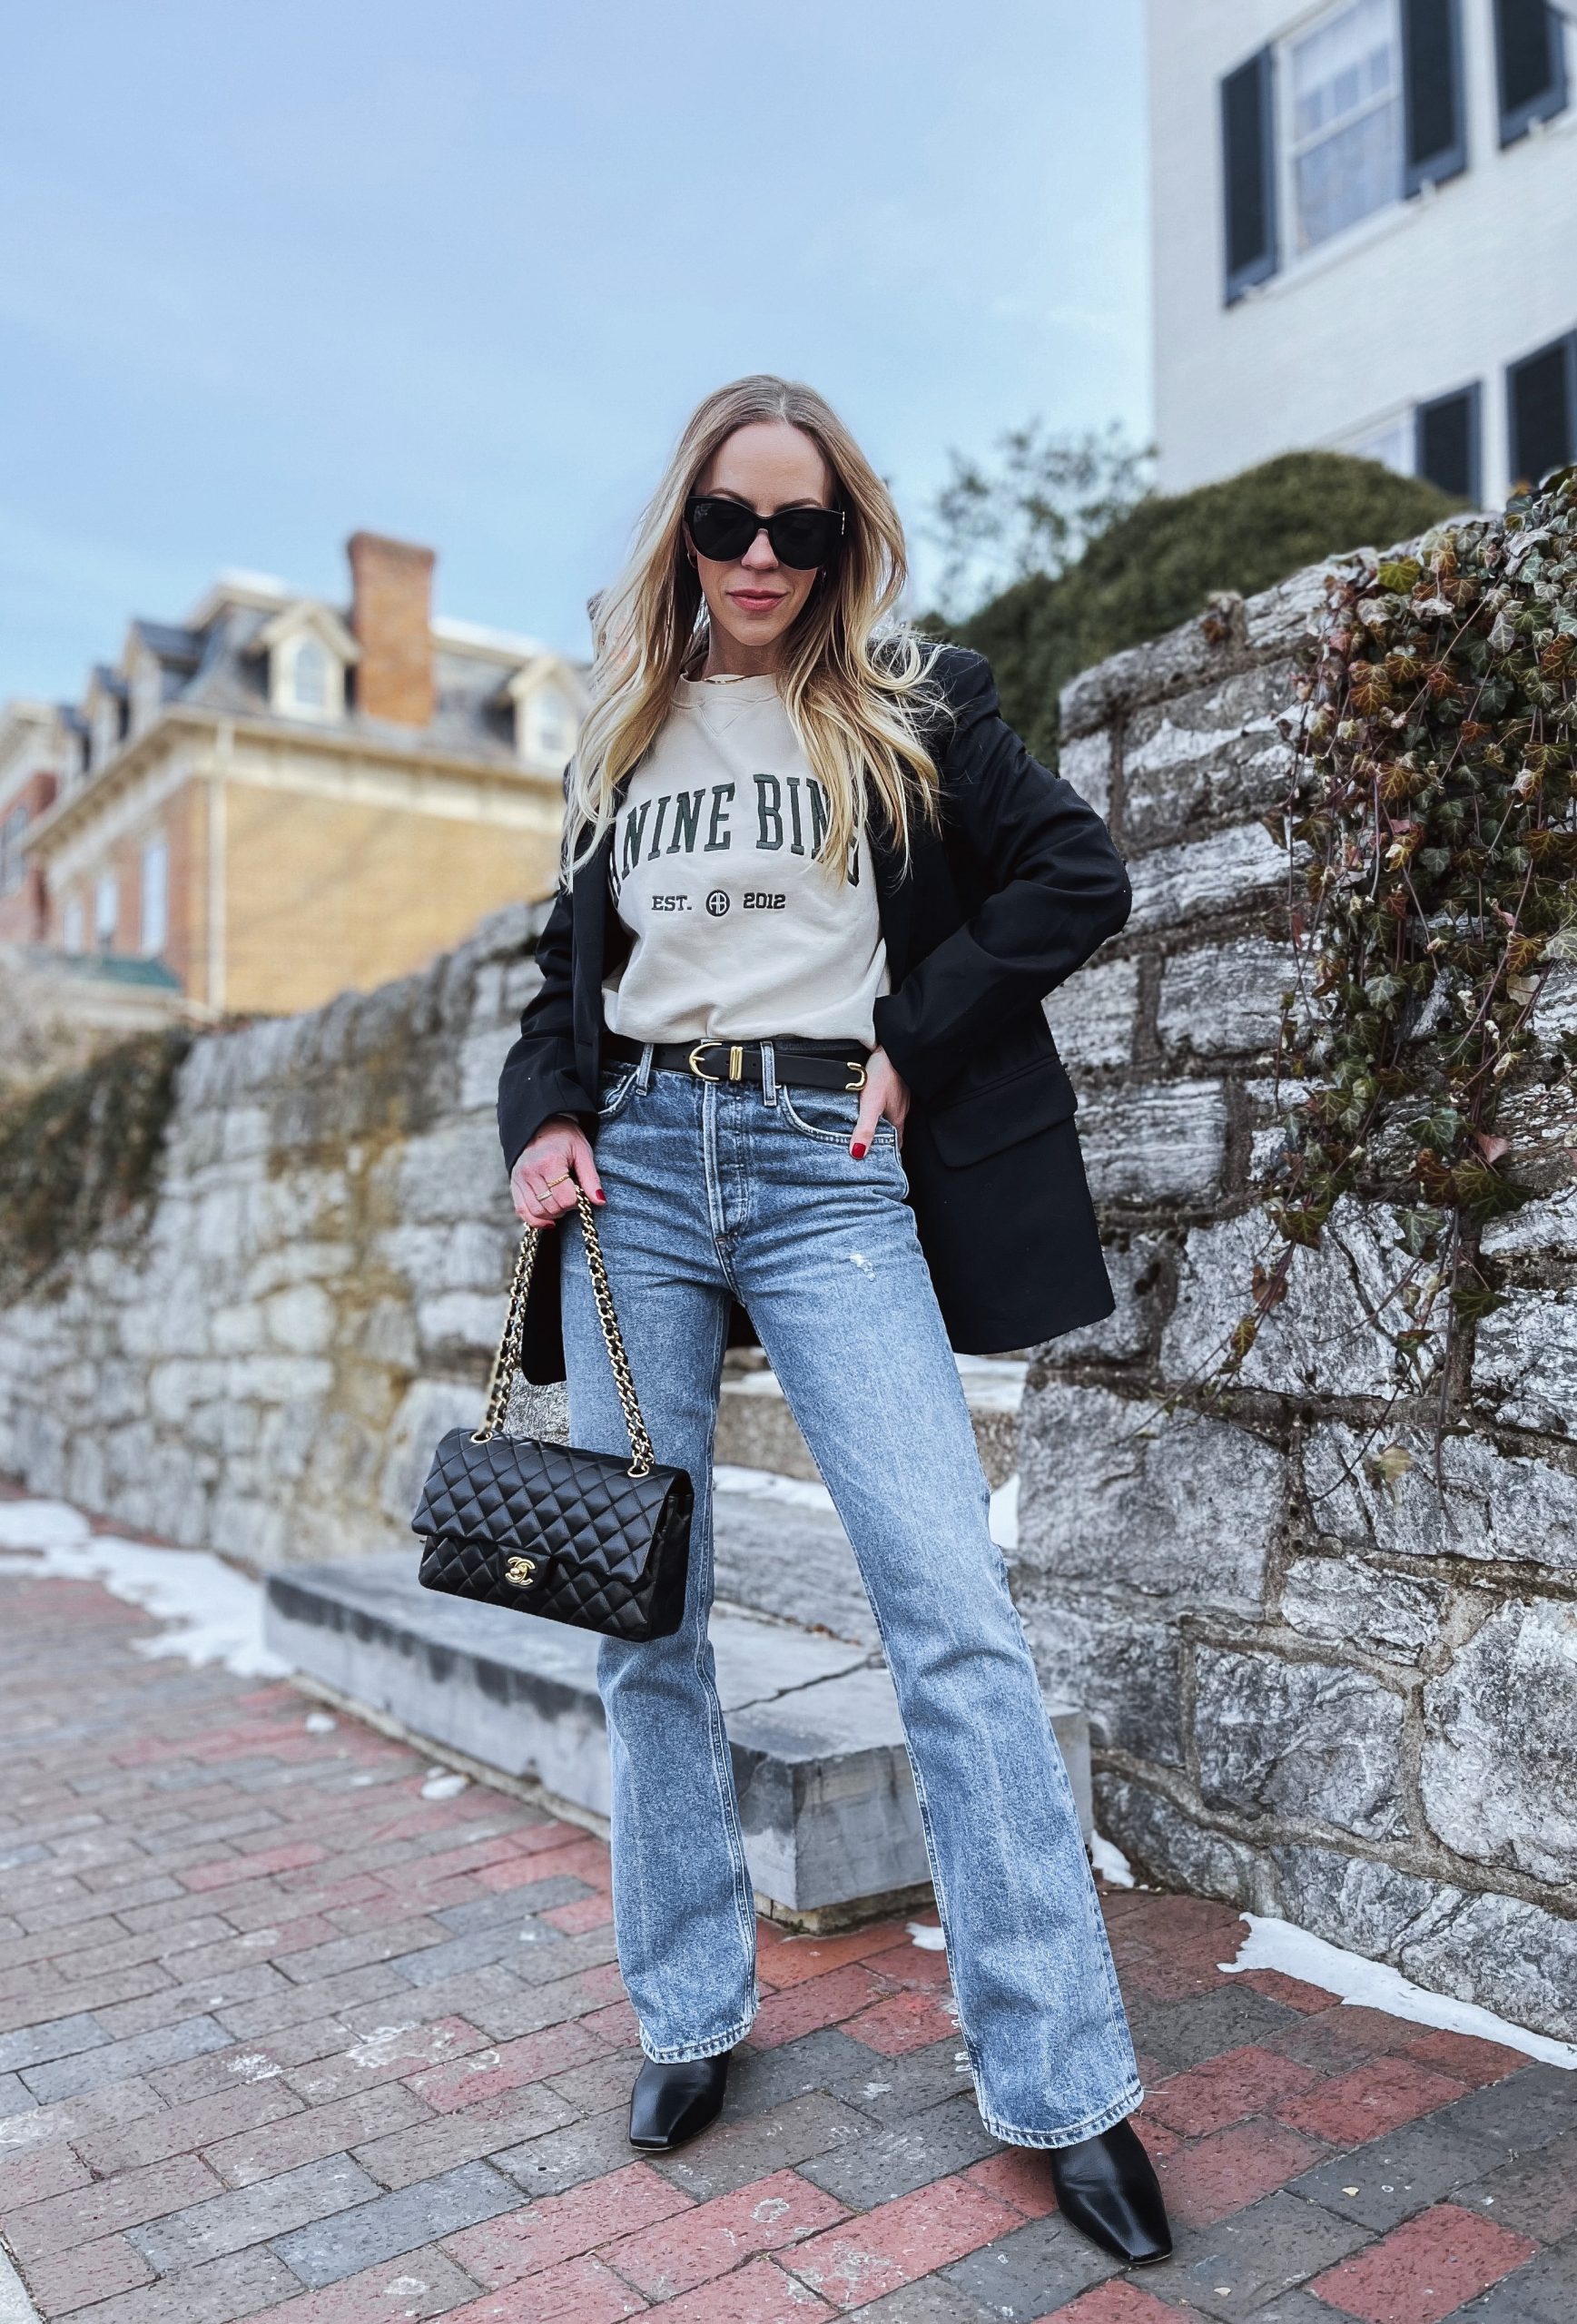 3 New Pairs of Jeans I'm Loving & Key Denim Trends for Spring 2022